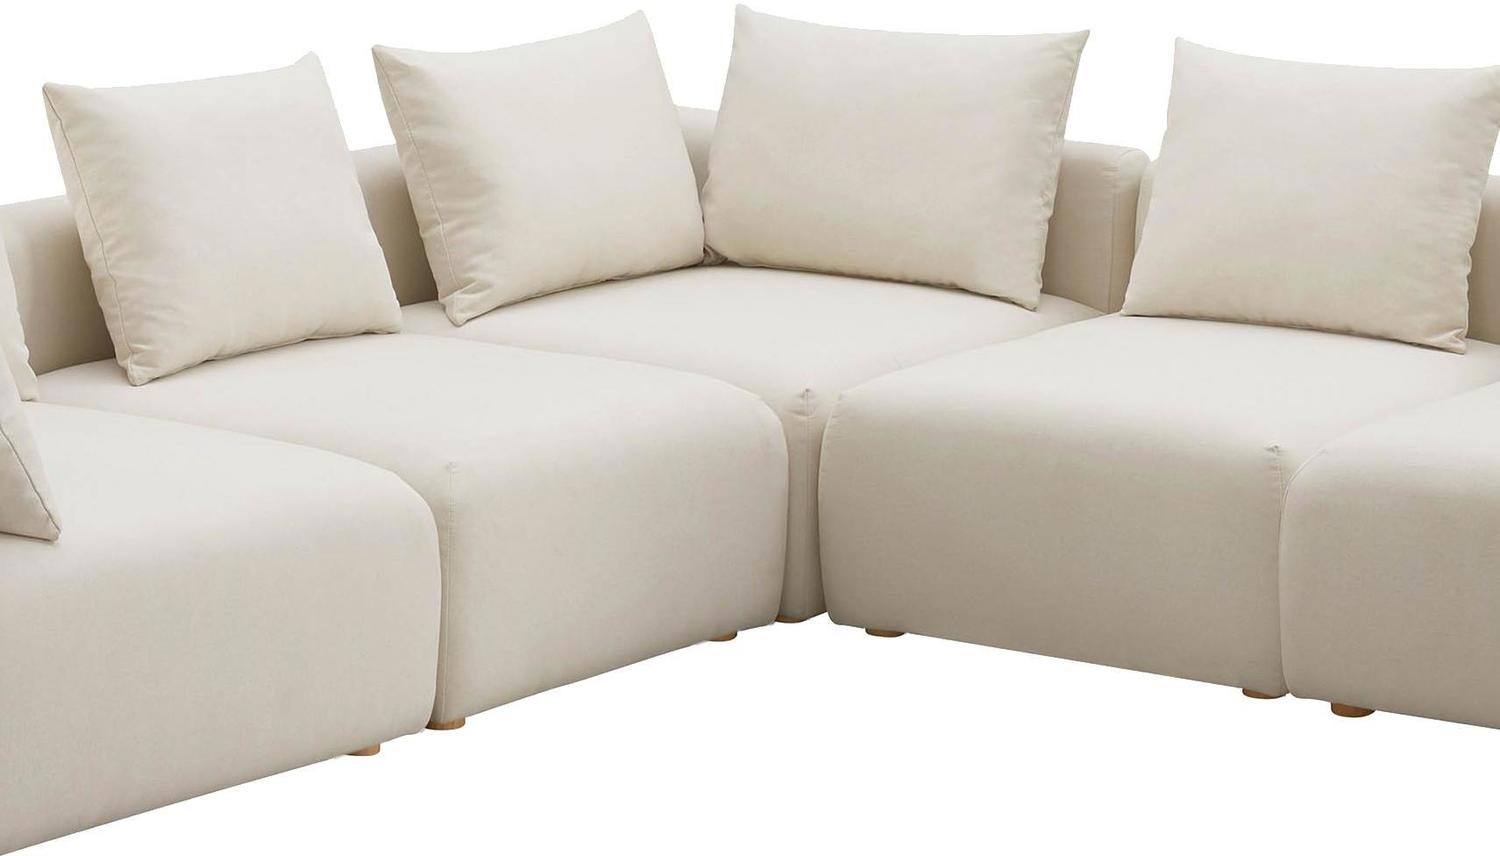 chaise sofas near me Contemporary Design Furniture Sectionals Cream